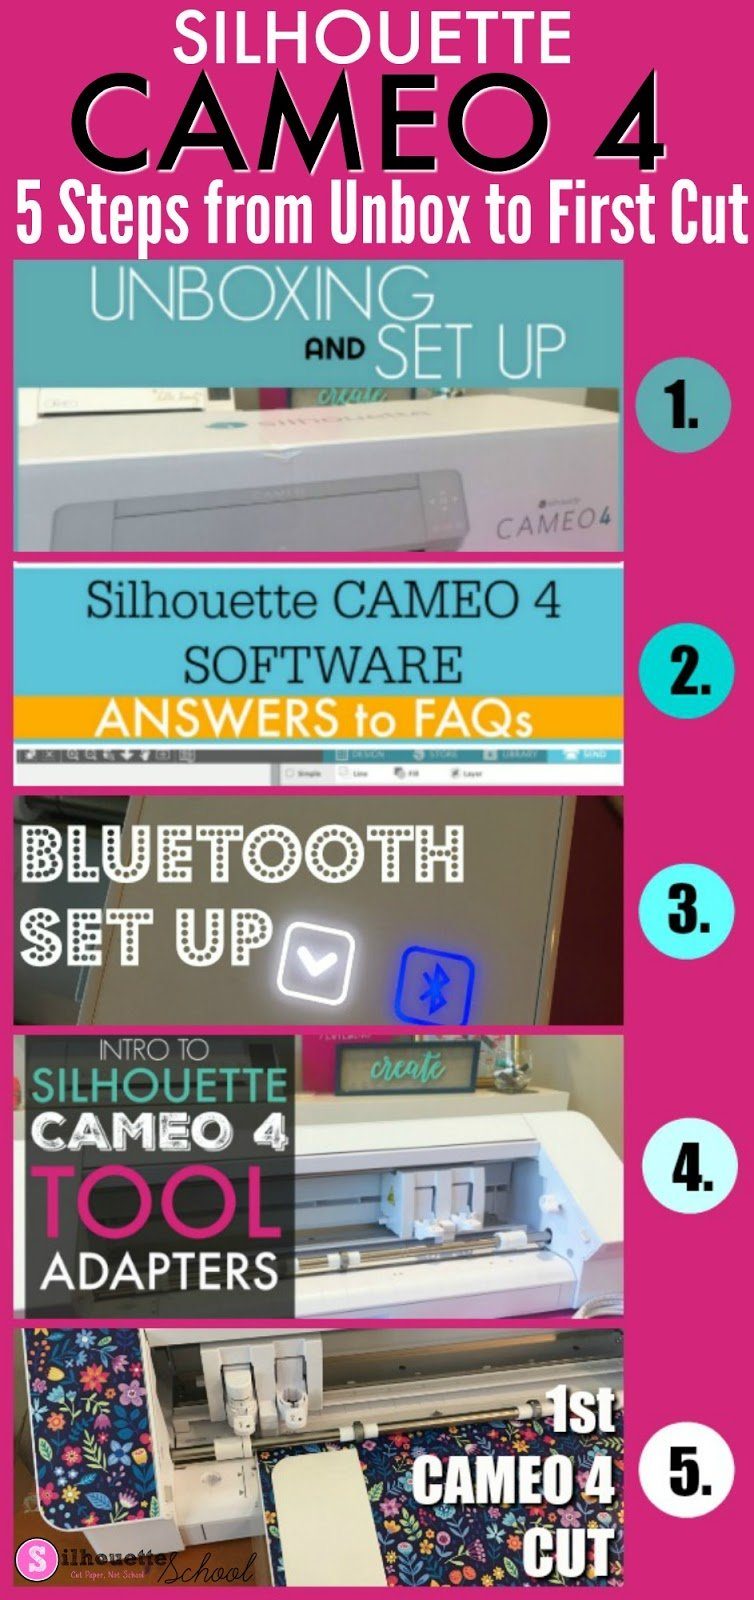 Silhouette Cameo 5 Unboxing and Setup 